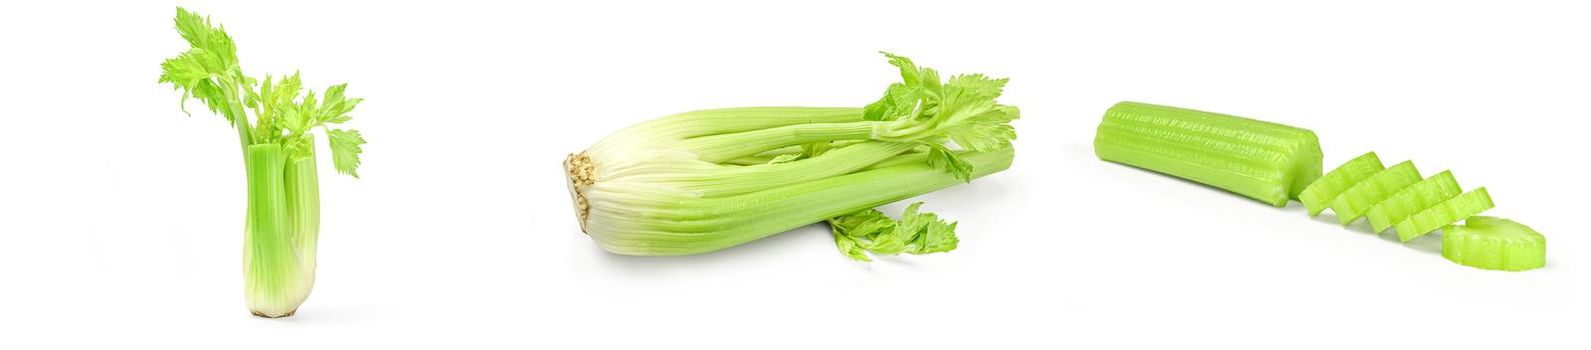 Collage of celery isolated on white